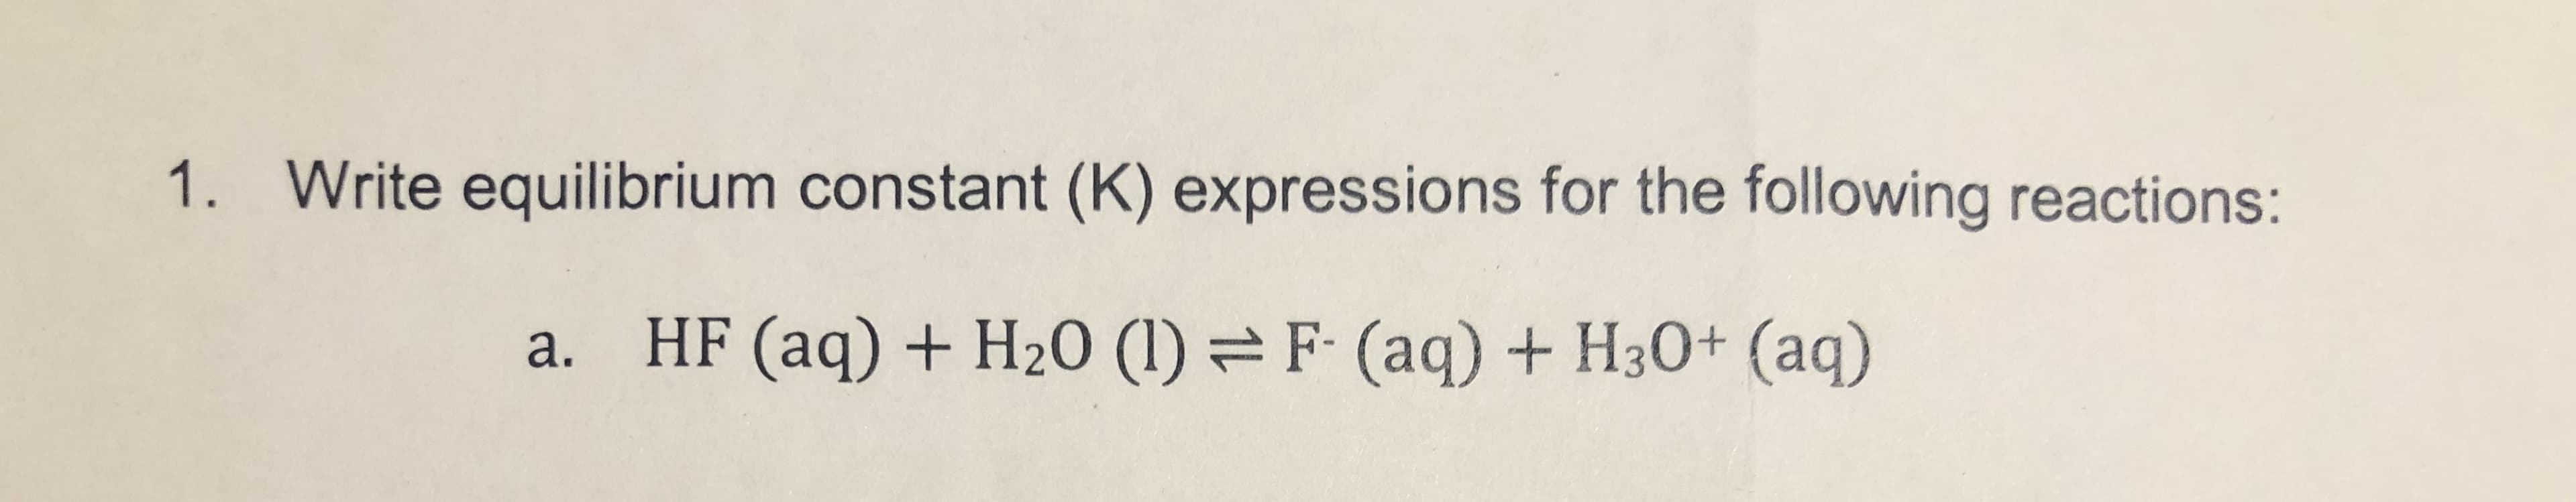 Write equilibrium constant (K) expressions for the following reactions:
1.
a. HF (aq) H20 (1) F- (aq)
H30+ (aq)
